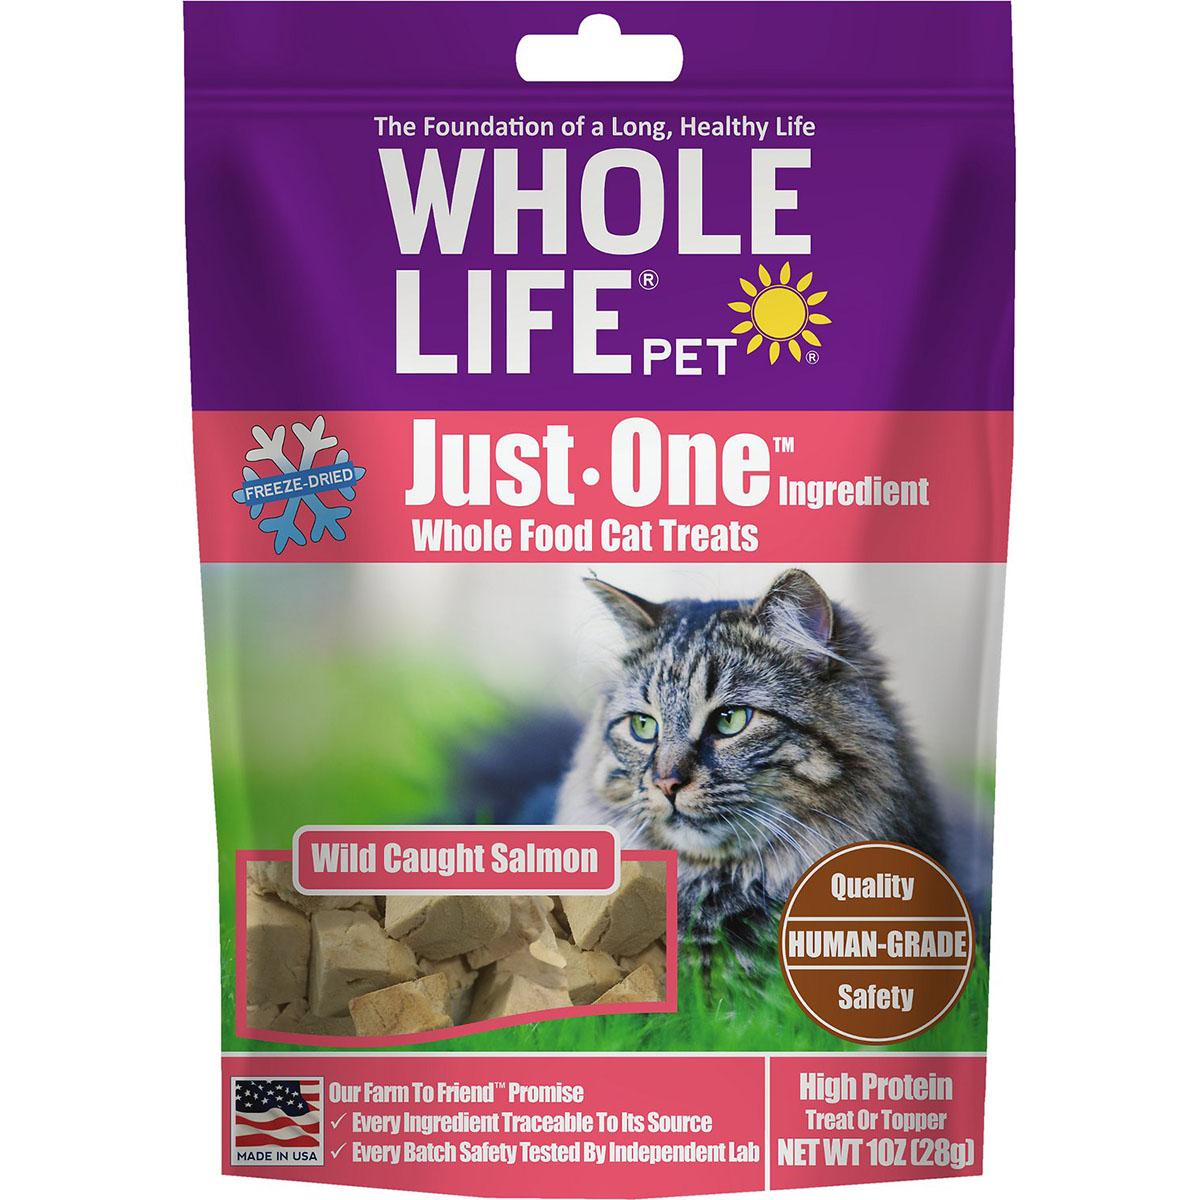 Whole Life Pet Just One Ingredient Freeze-Dried Salmon Cat Treats 